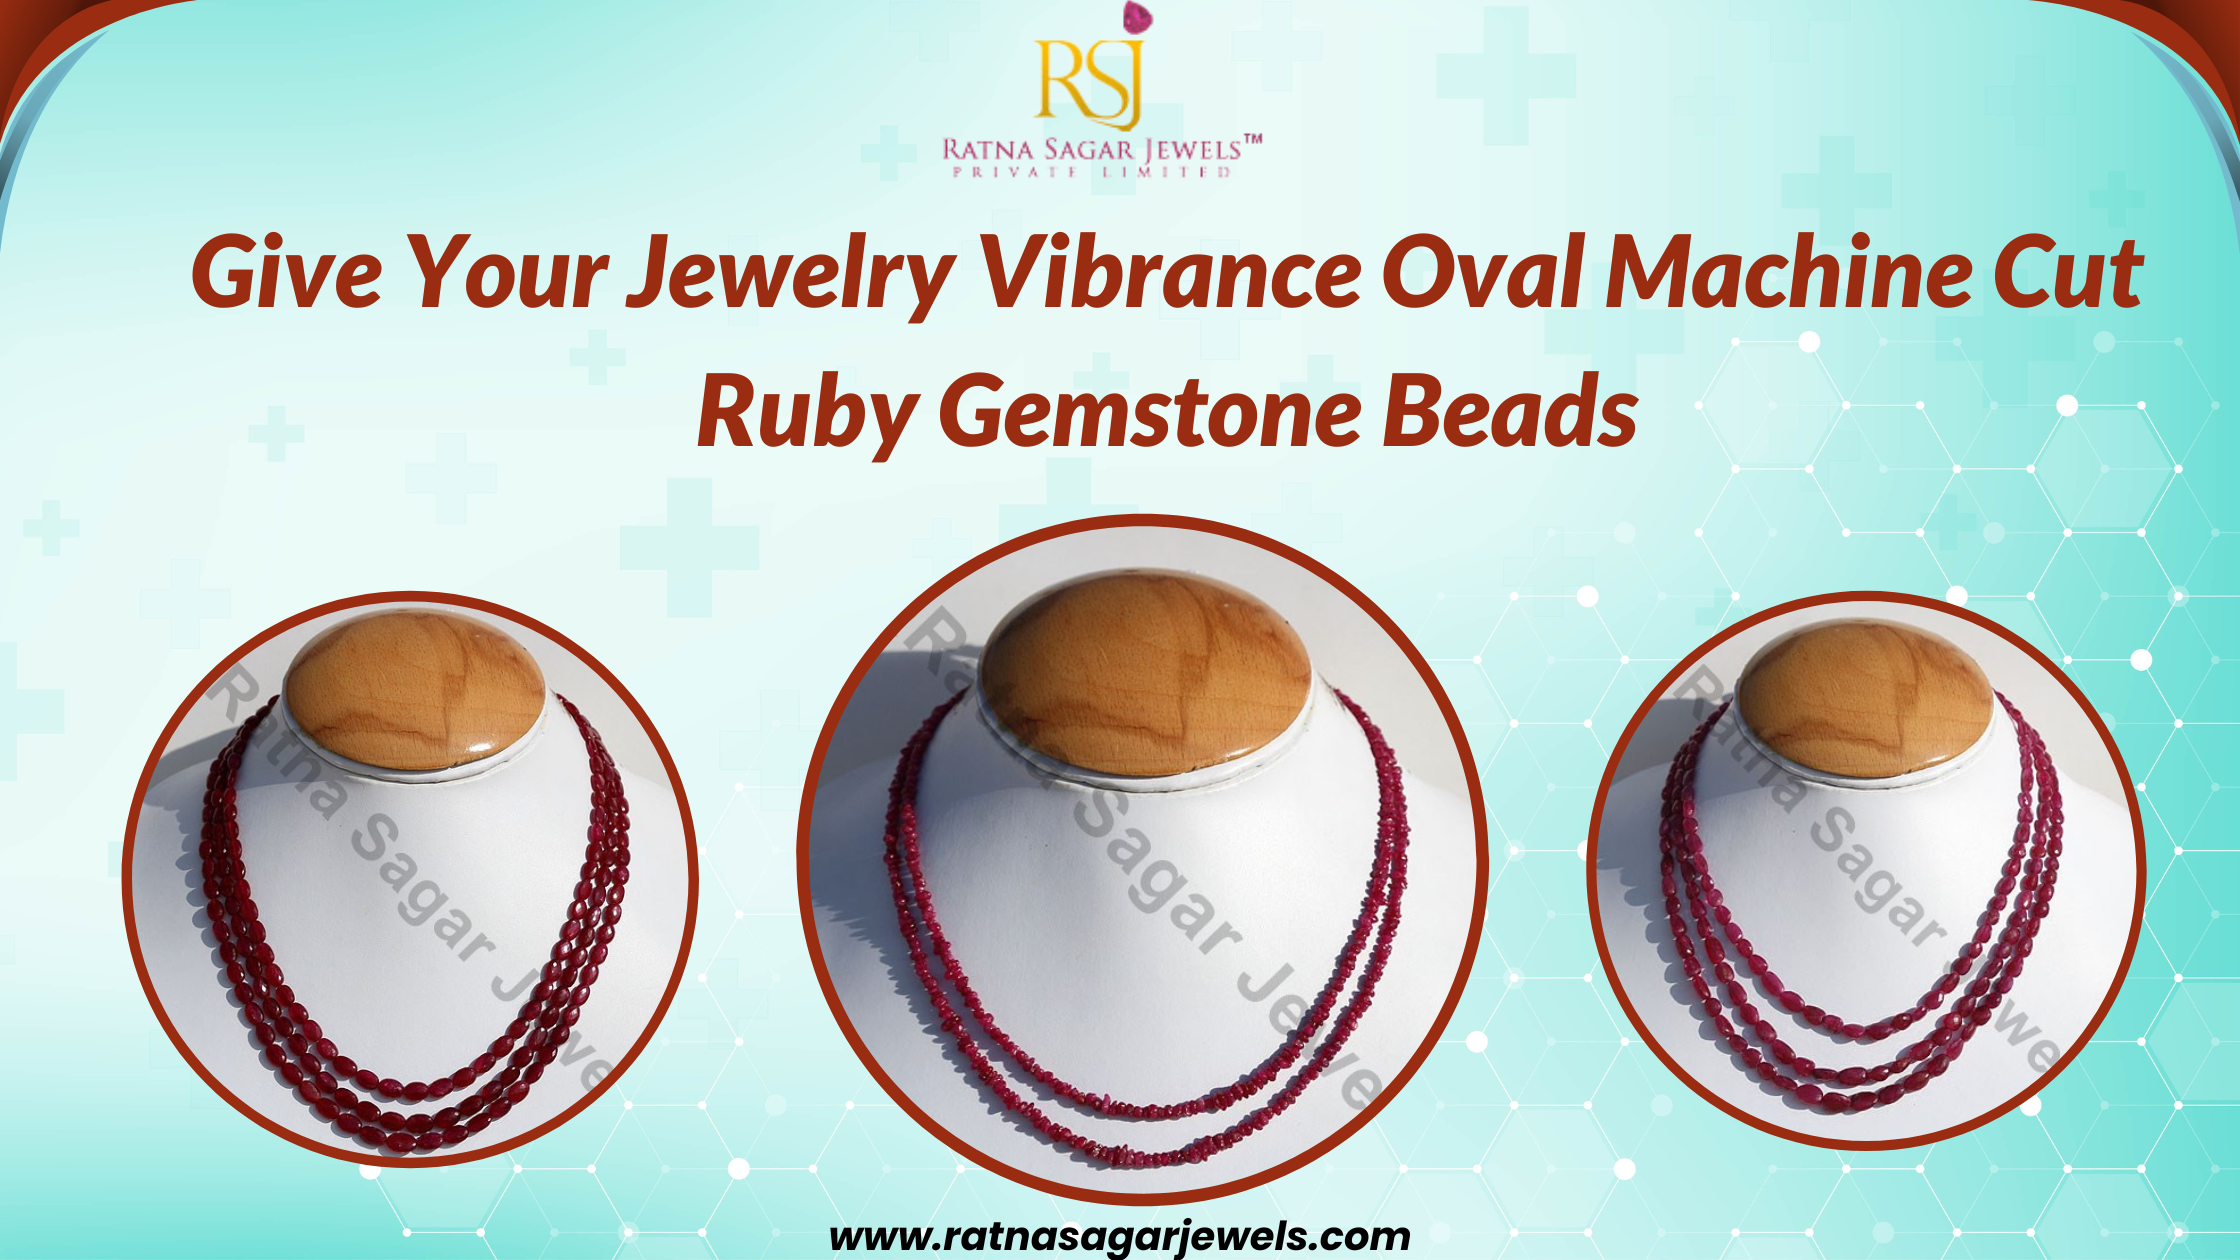 Give Your Jewelry Vibrance! Oval Machine Cut Ruby Gemstone Beads